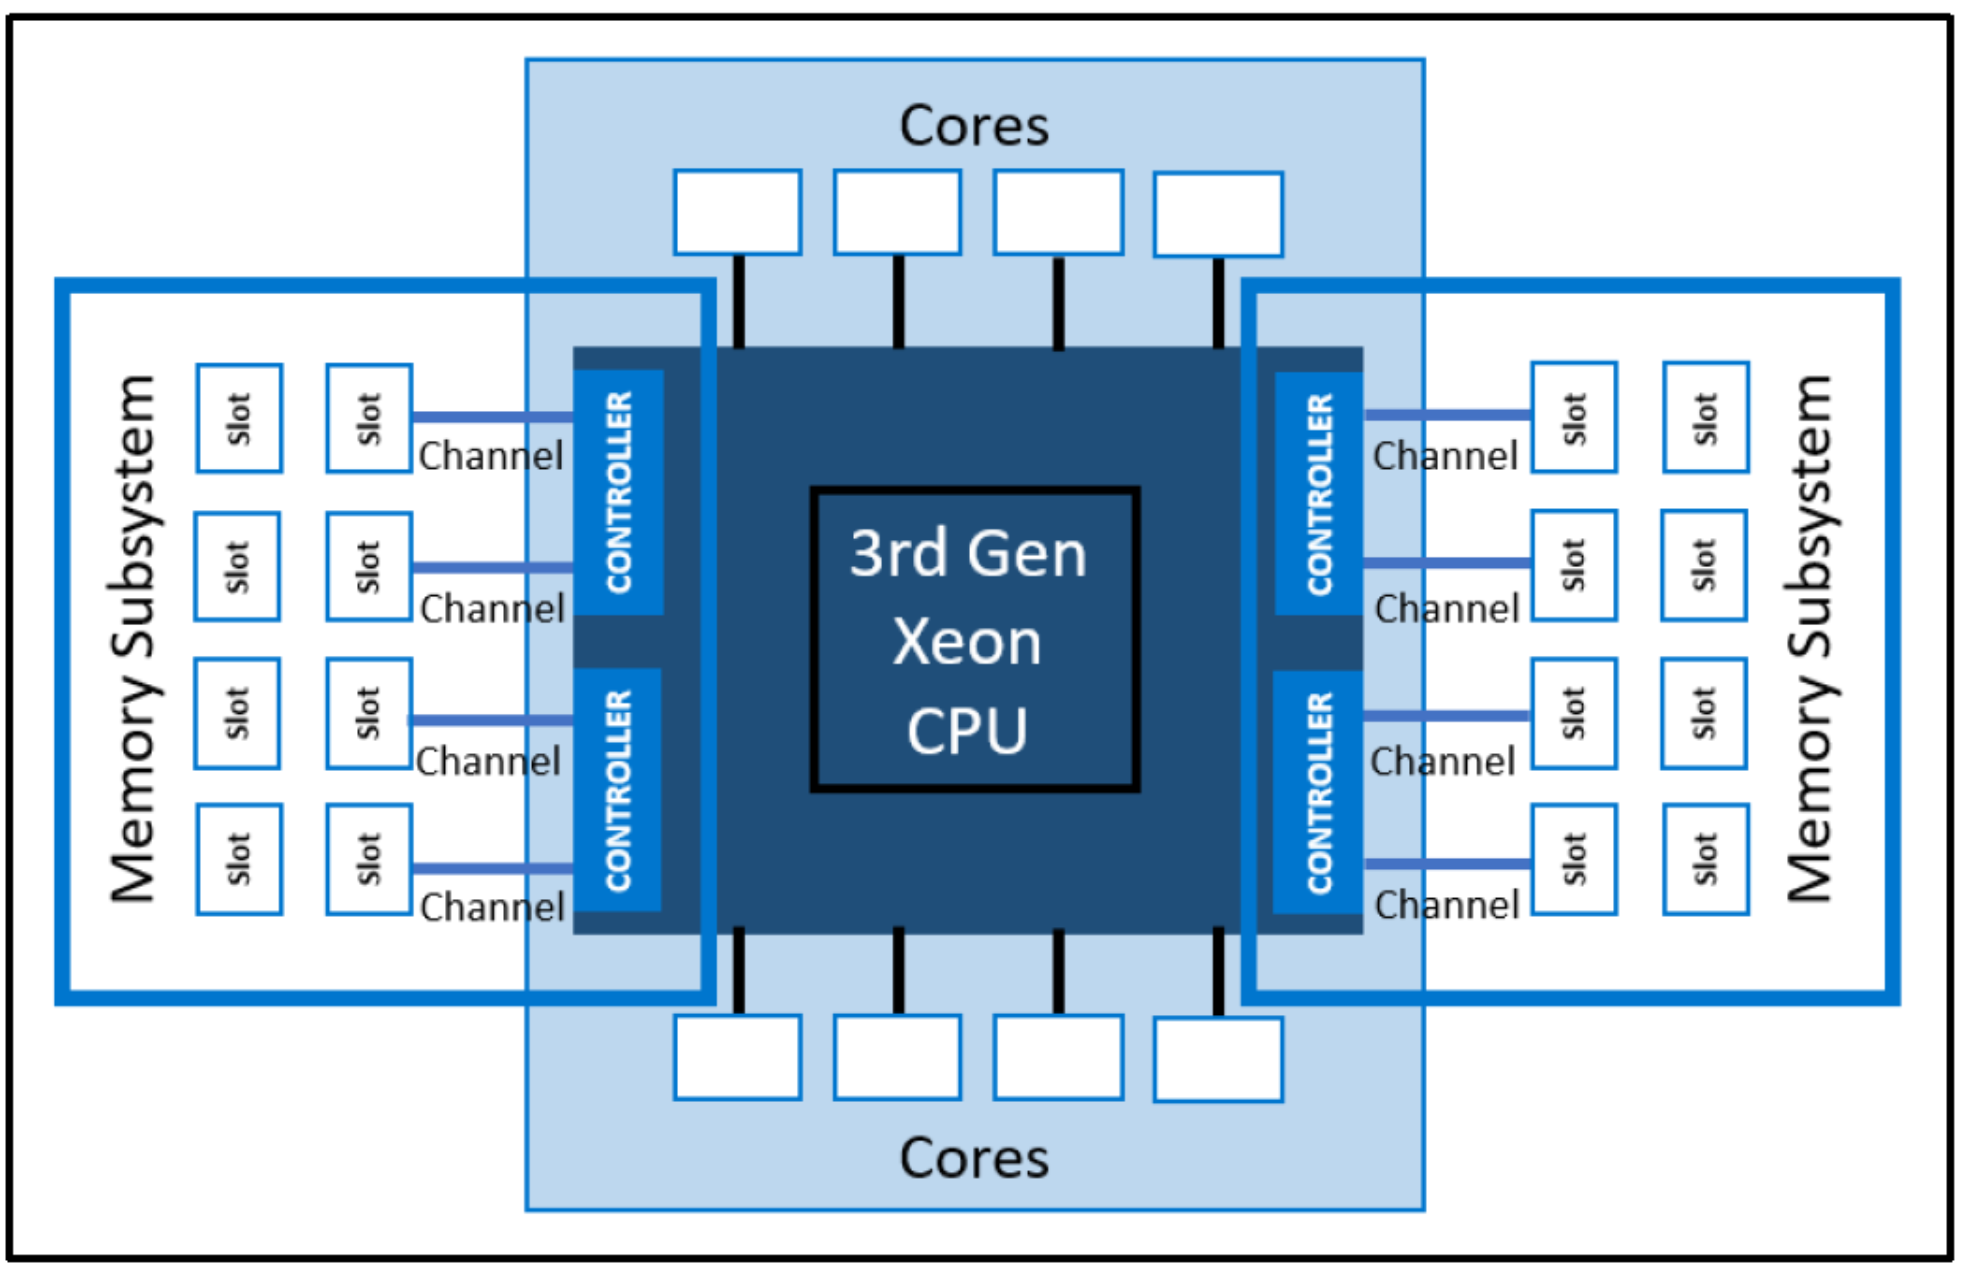 the type of memory assignment used in intel processors is